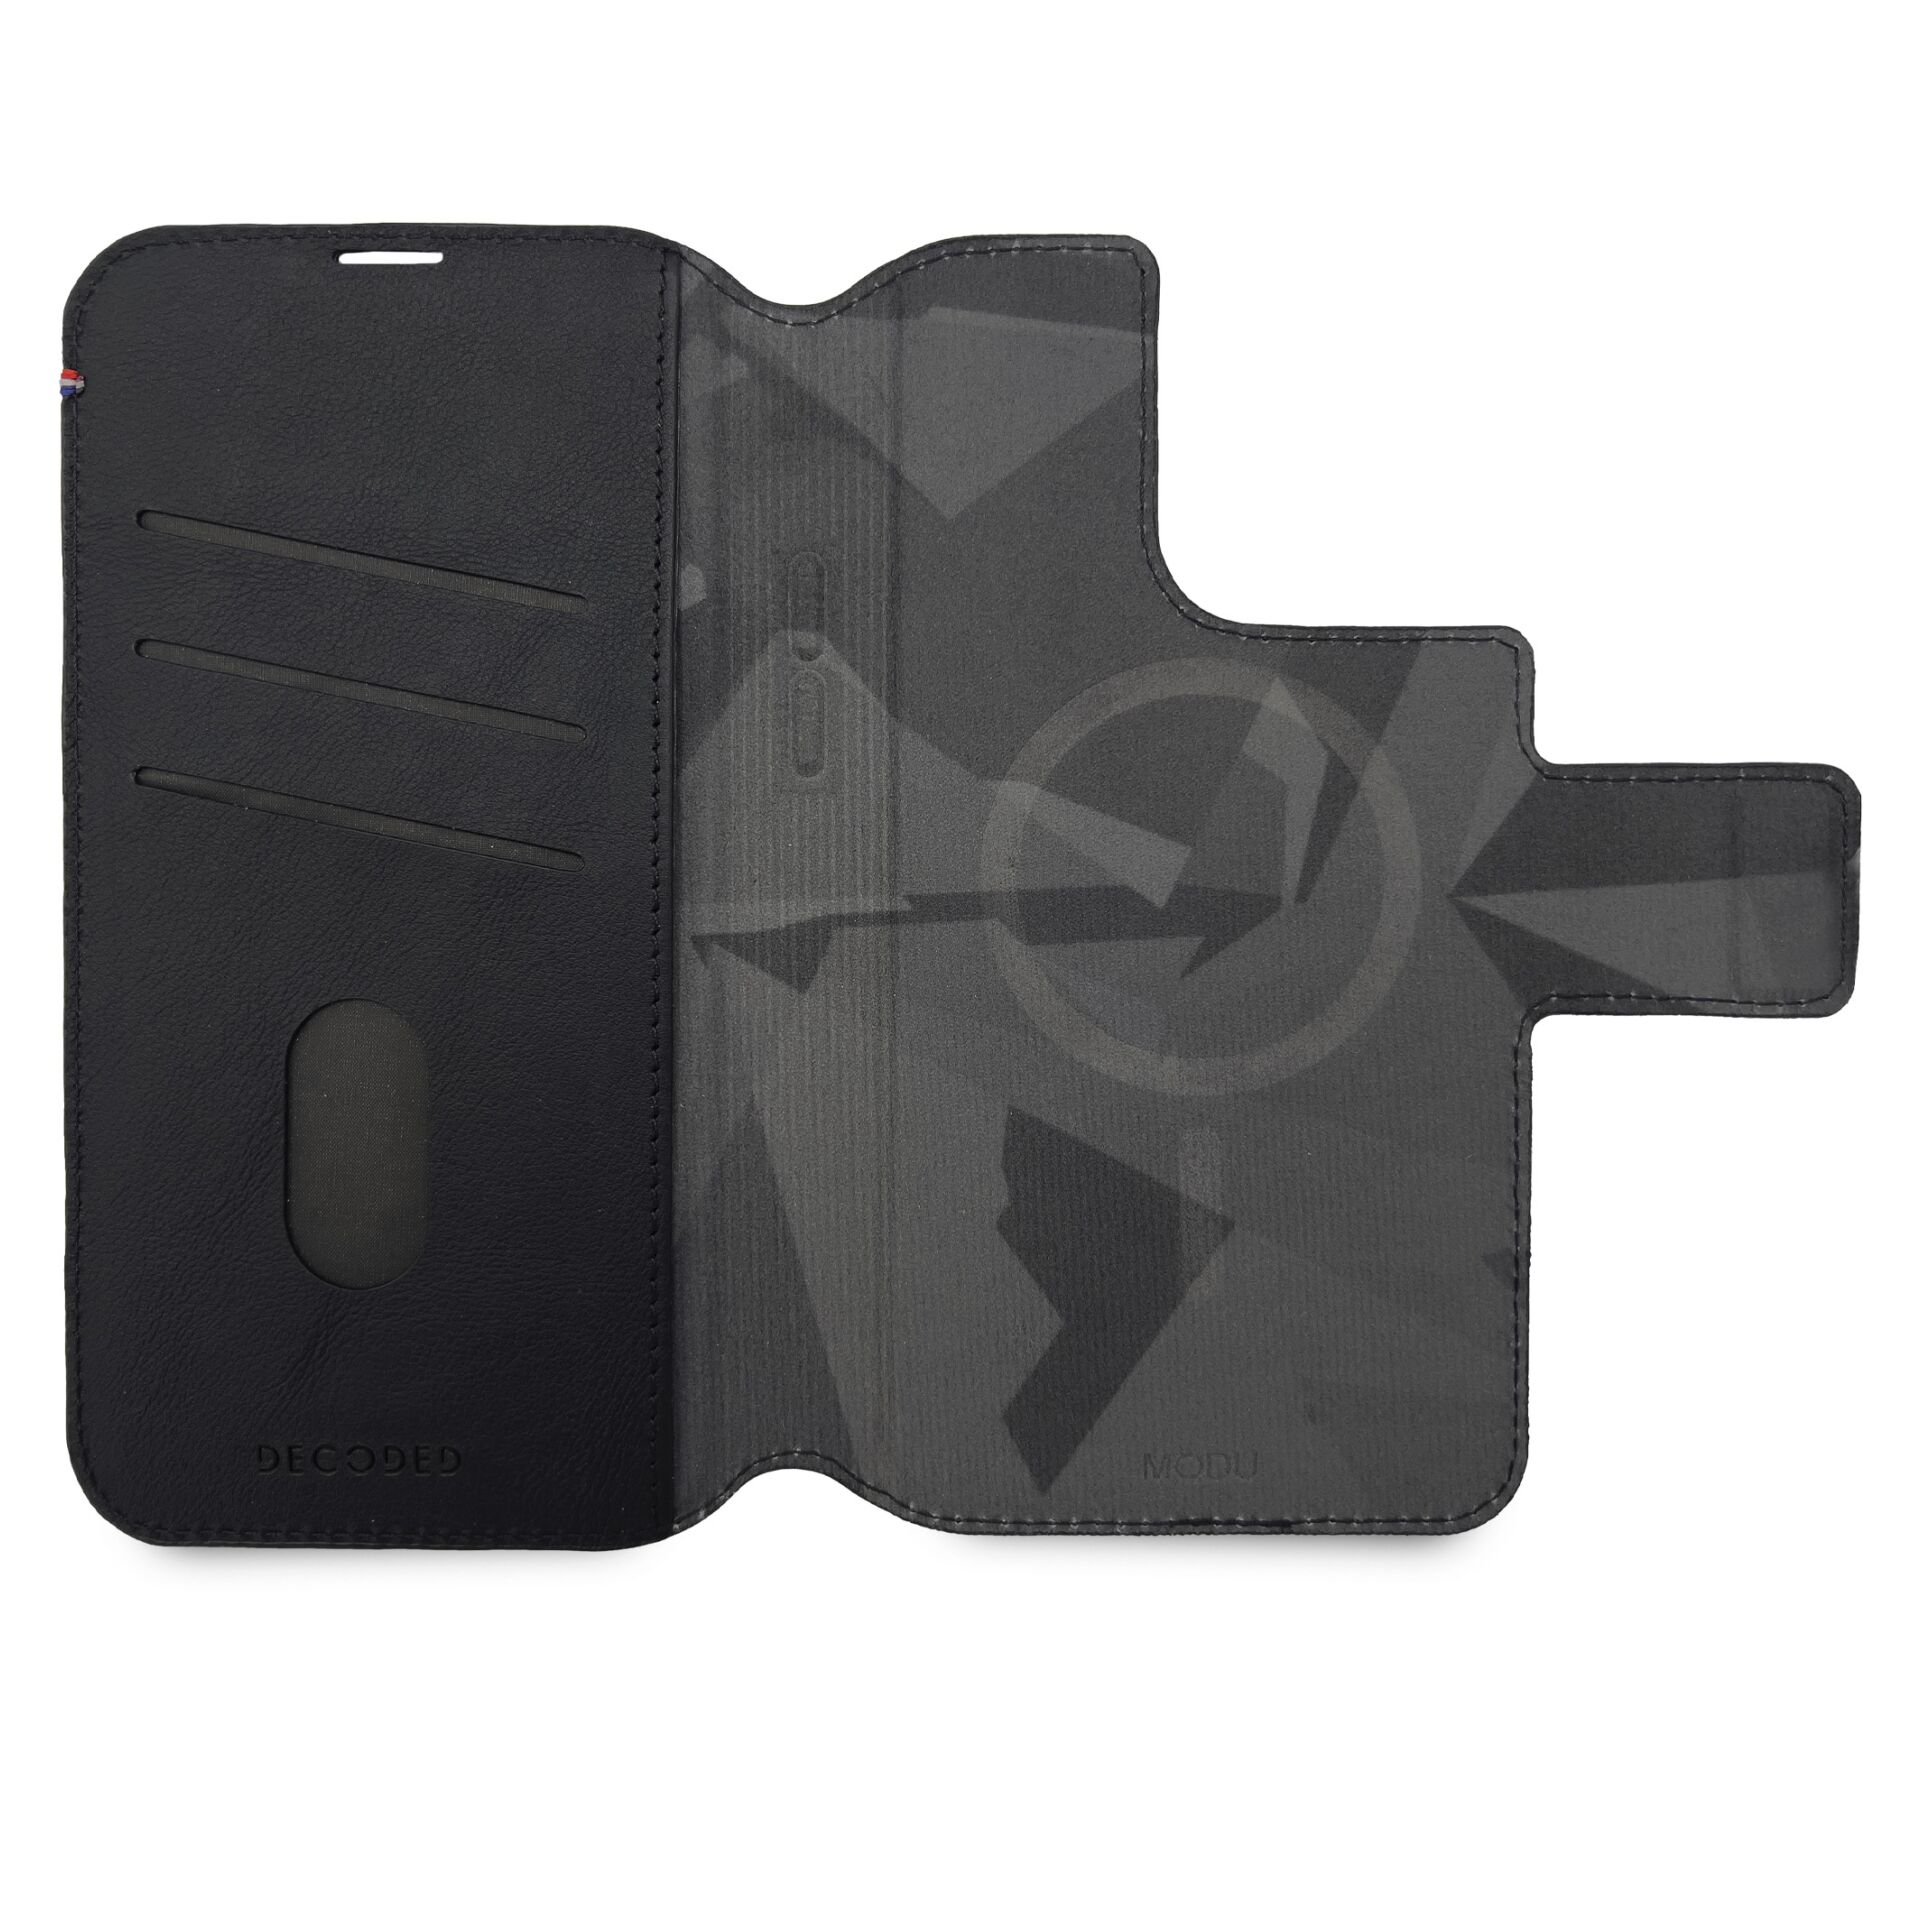 Modu Black Wallet Max, Pro 14 iPhone DECODED Black, Apple, Bookcover, Leather MagSafe